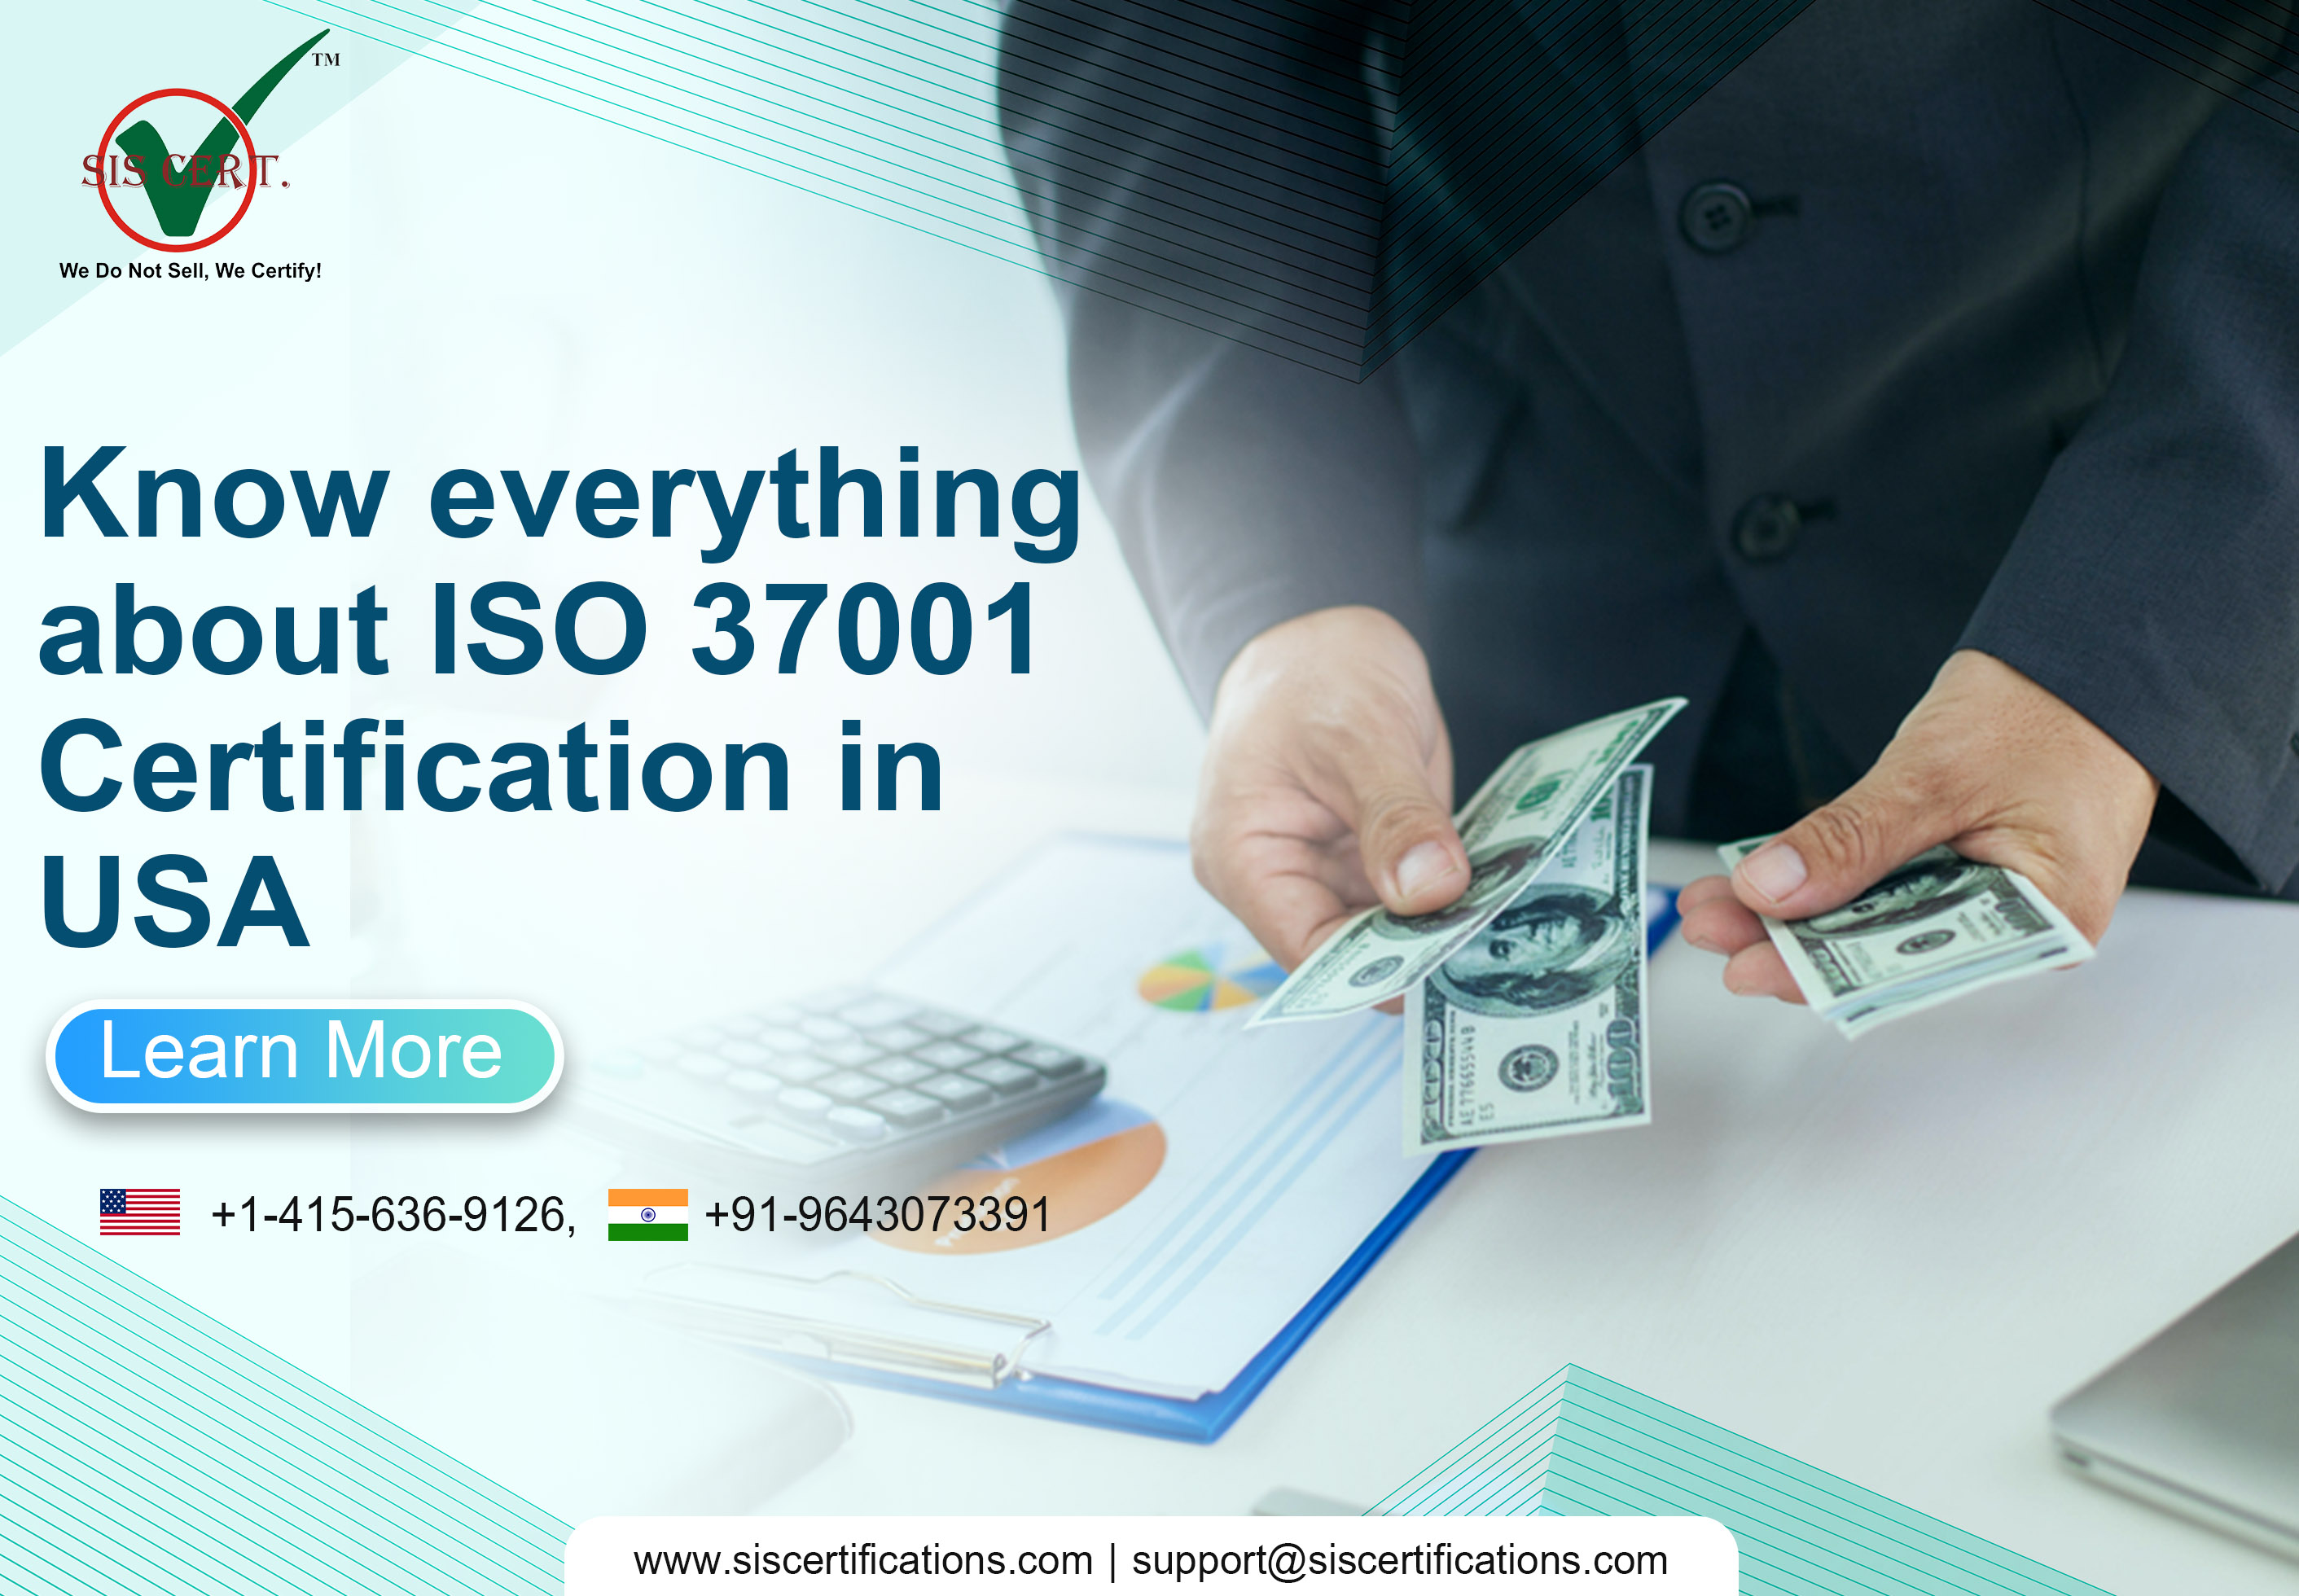 know everything about ISO 37001 certification in USA